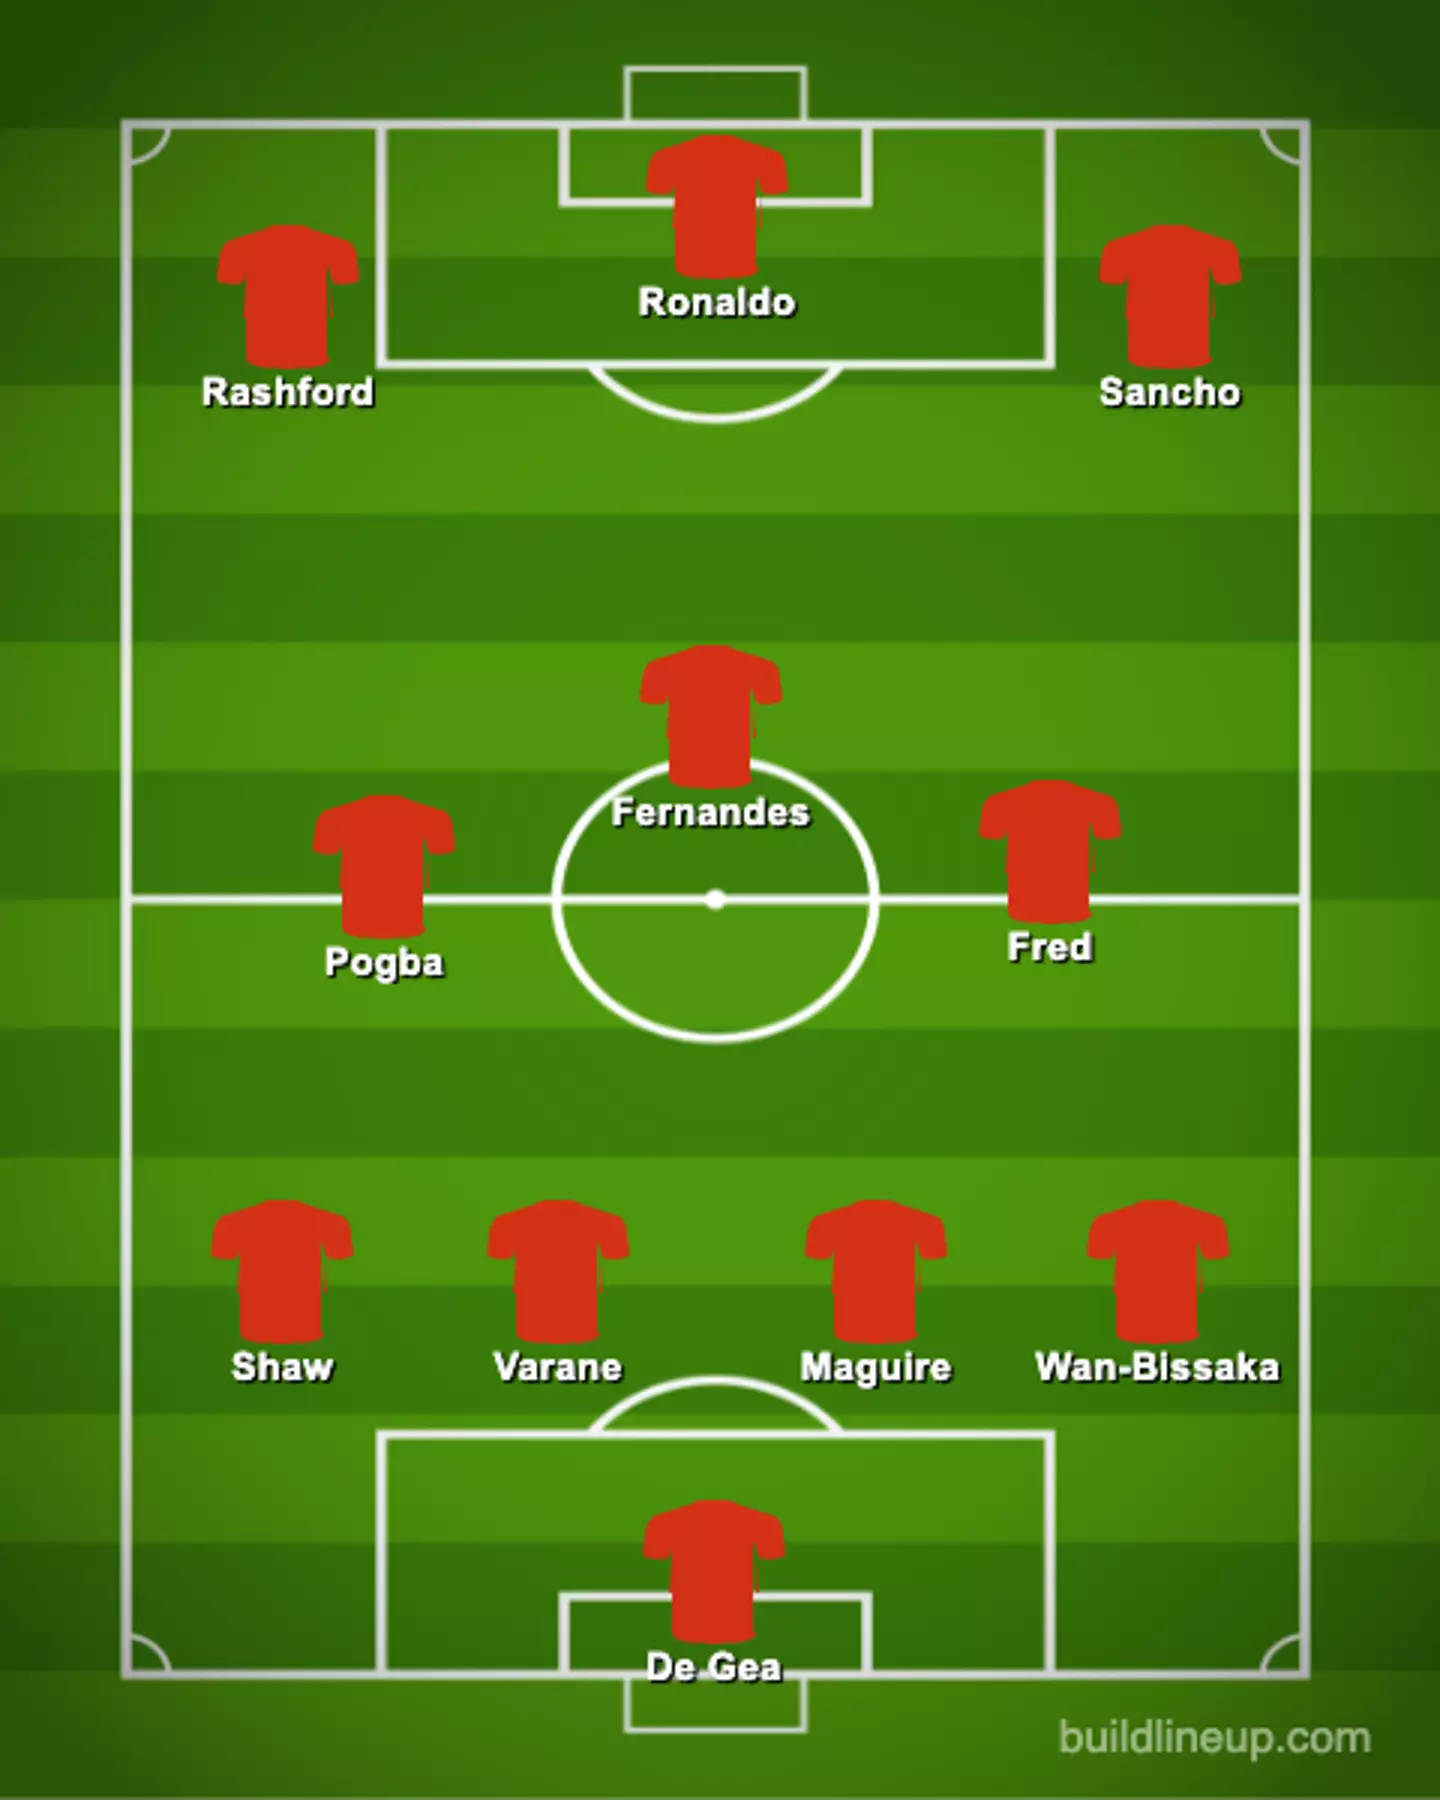 How Ronaldo would line up in a 4-3-3 formation